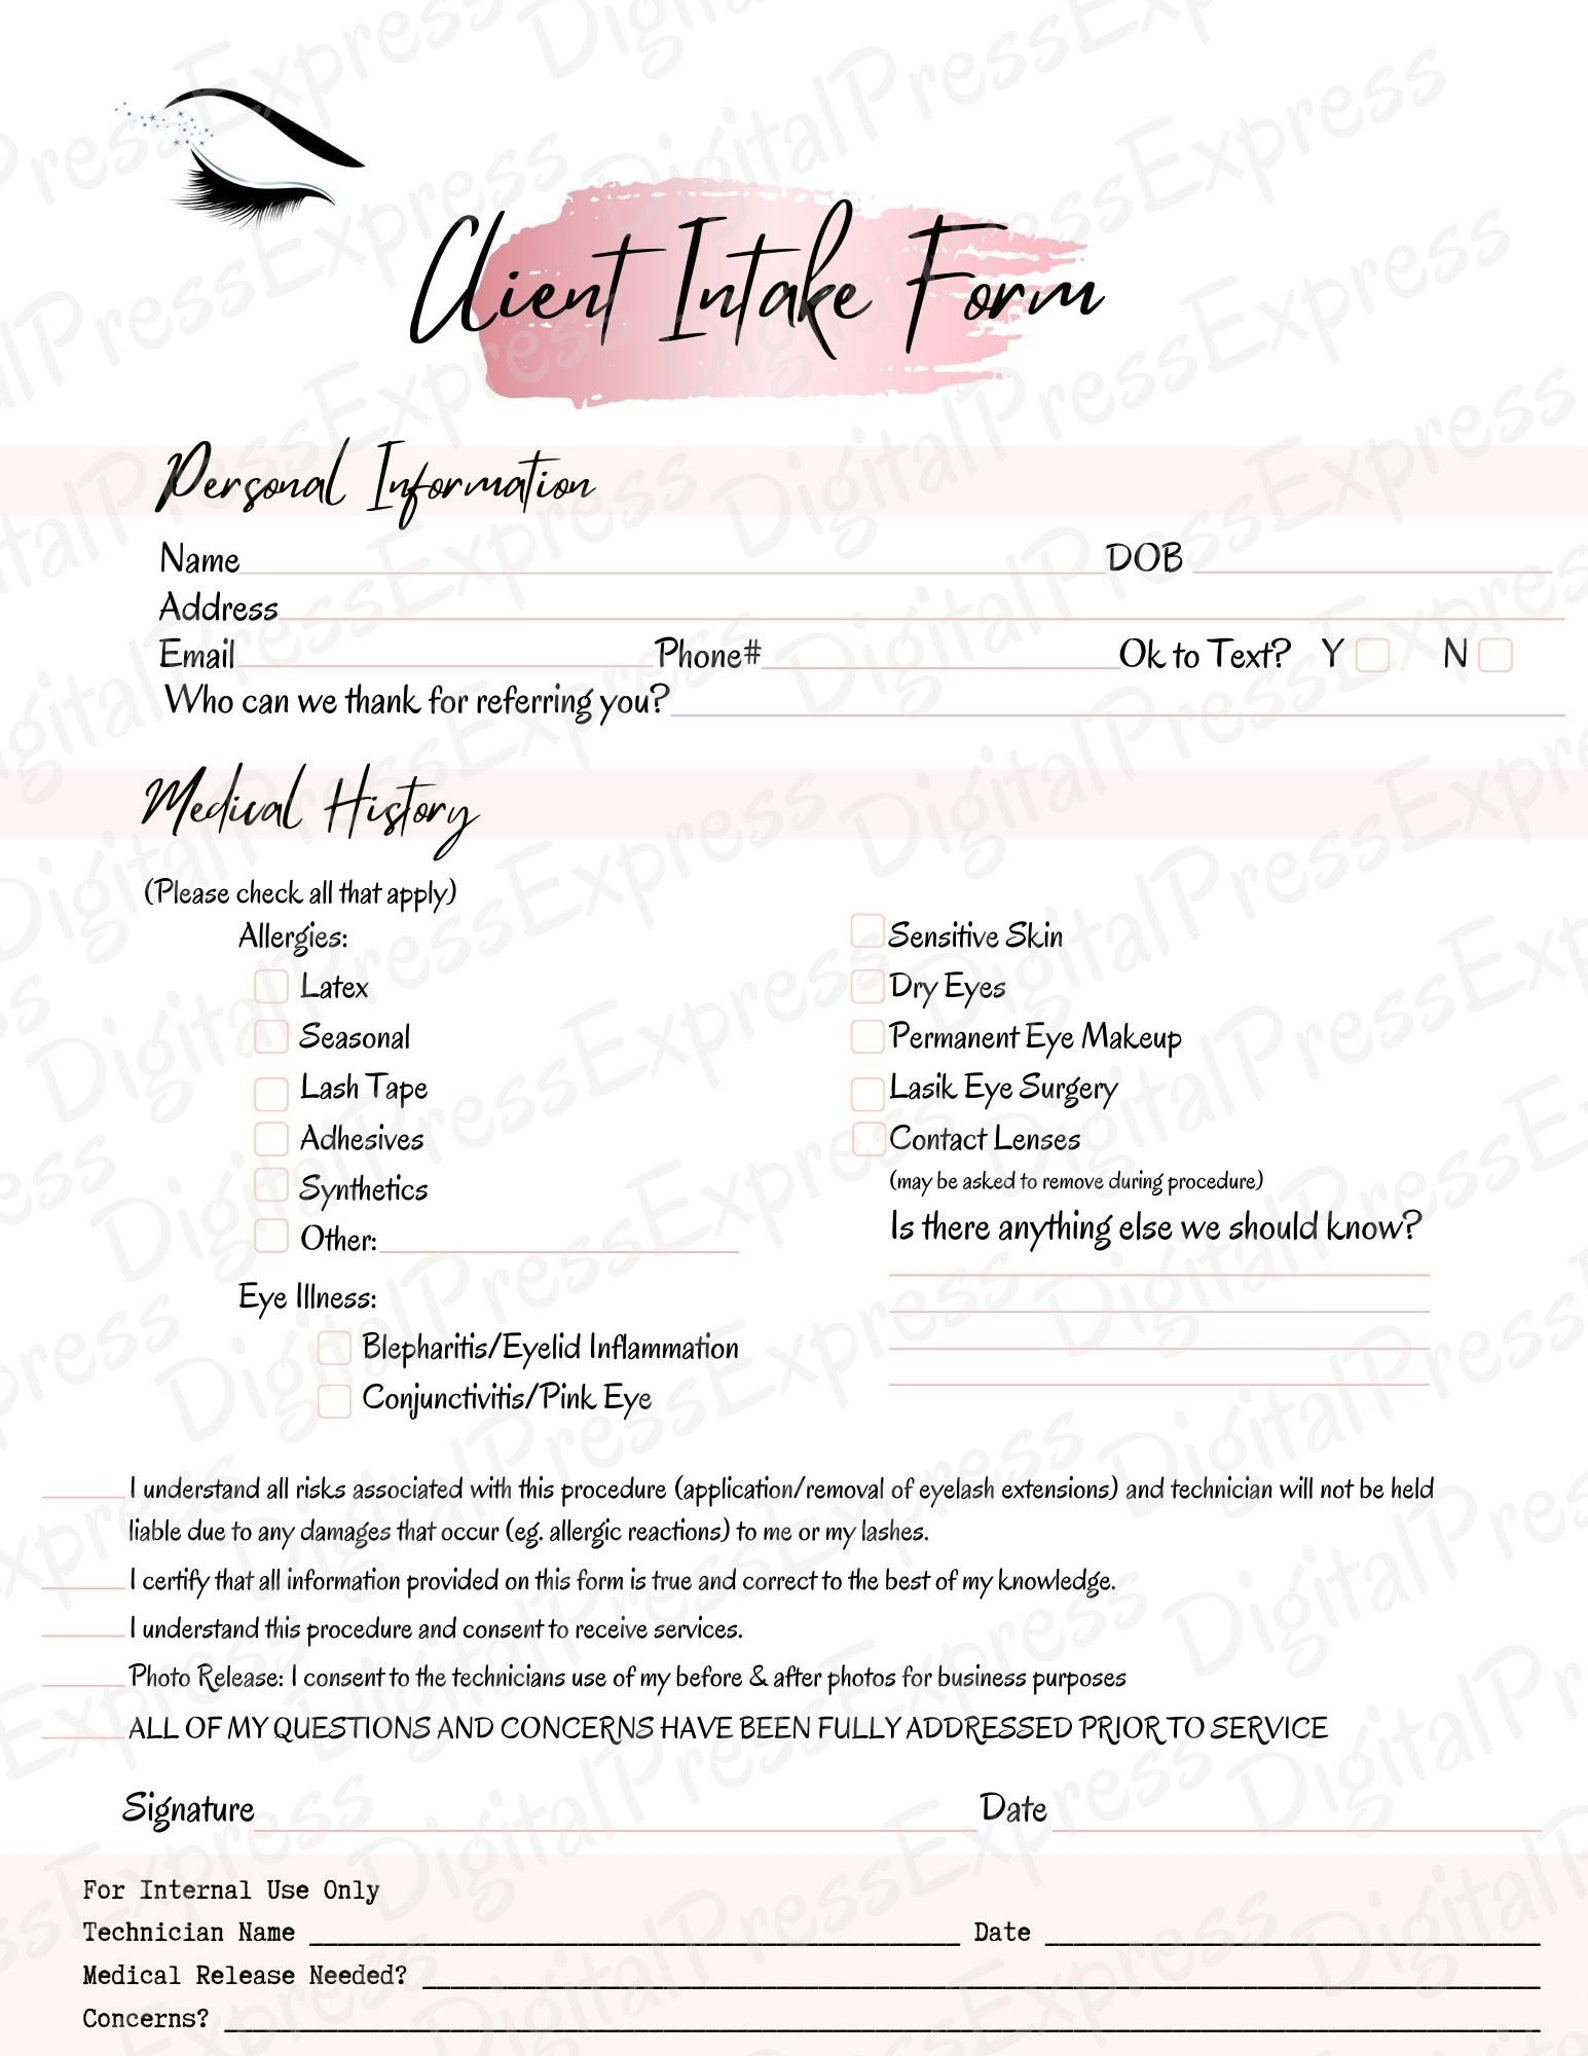 eyelash-extension-consent-form-template-free